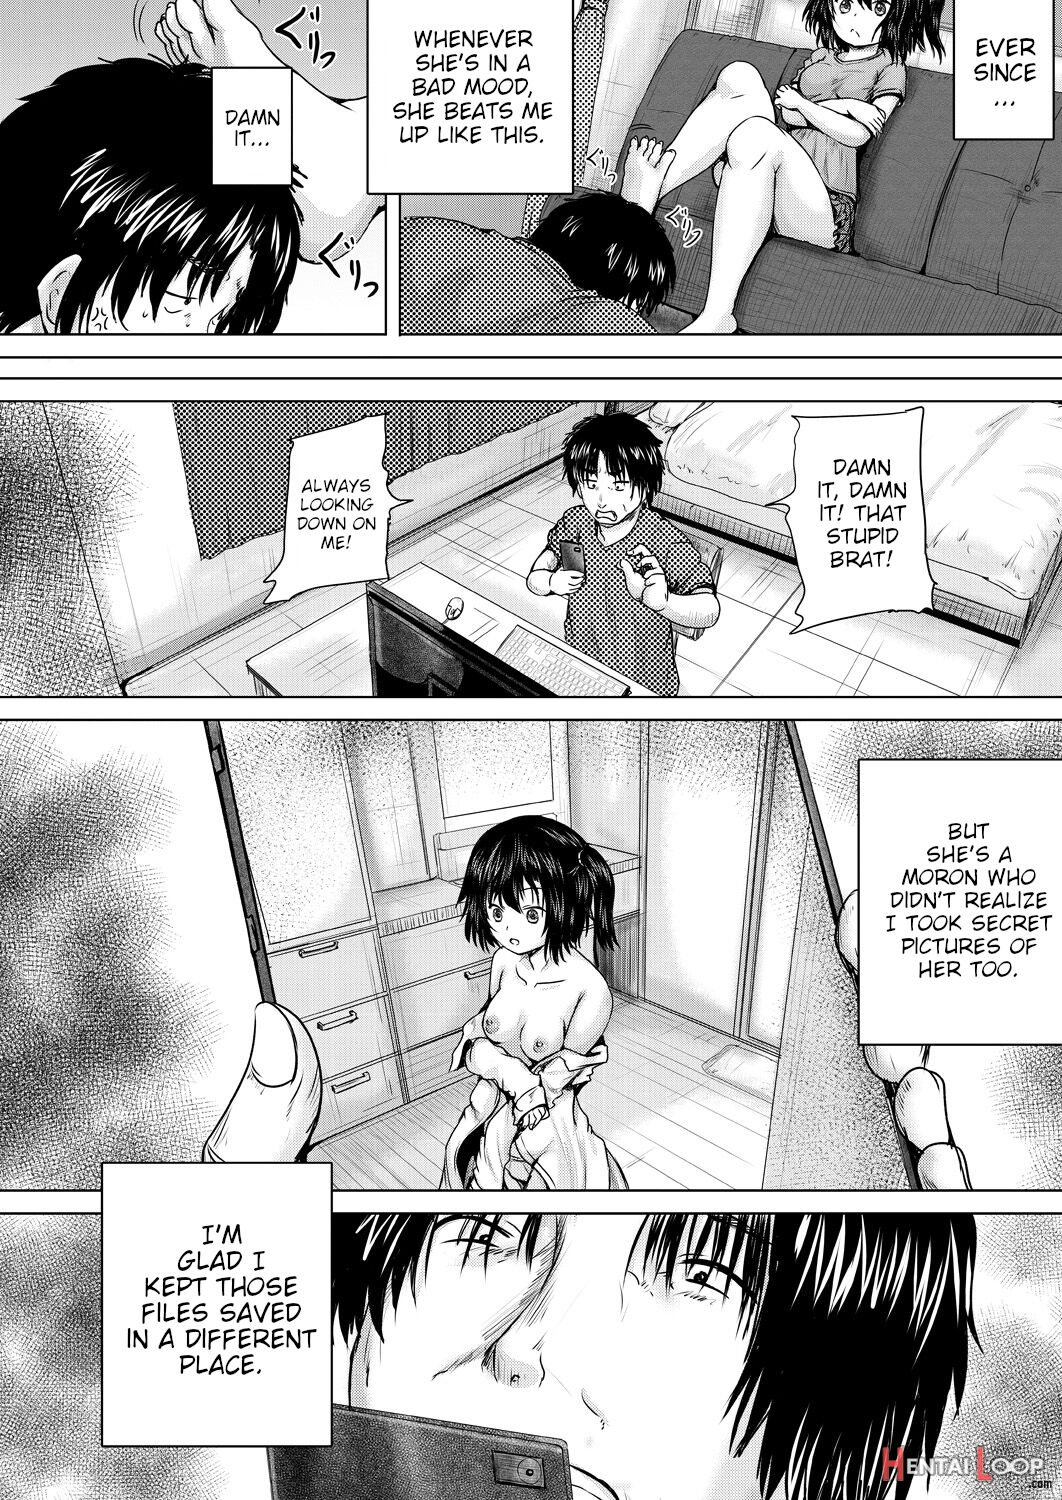 Leave It To Onii-chan Chapters 1-4 page 6